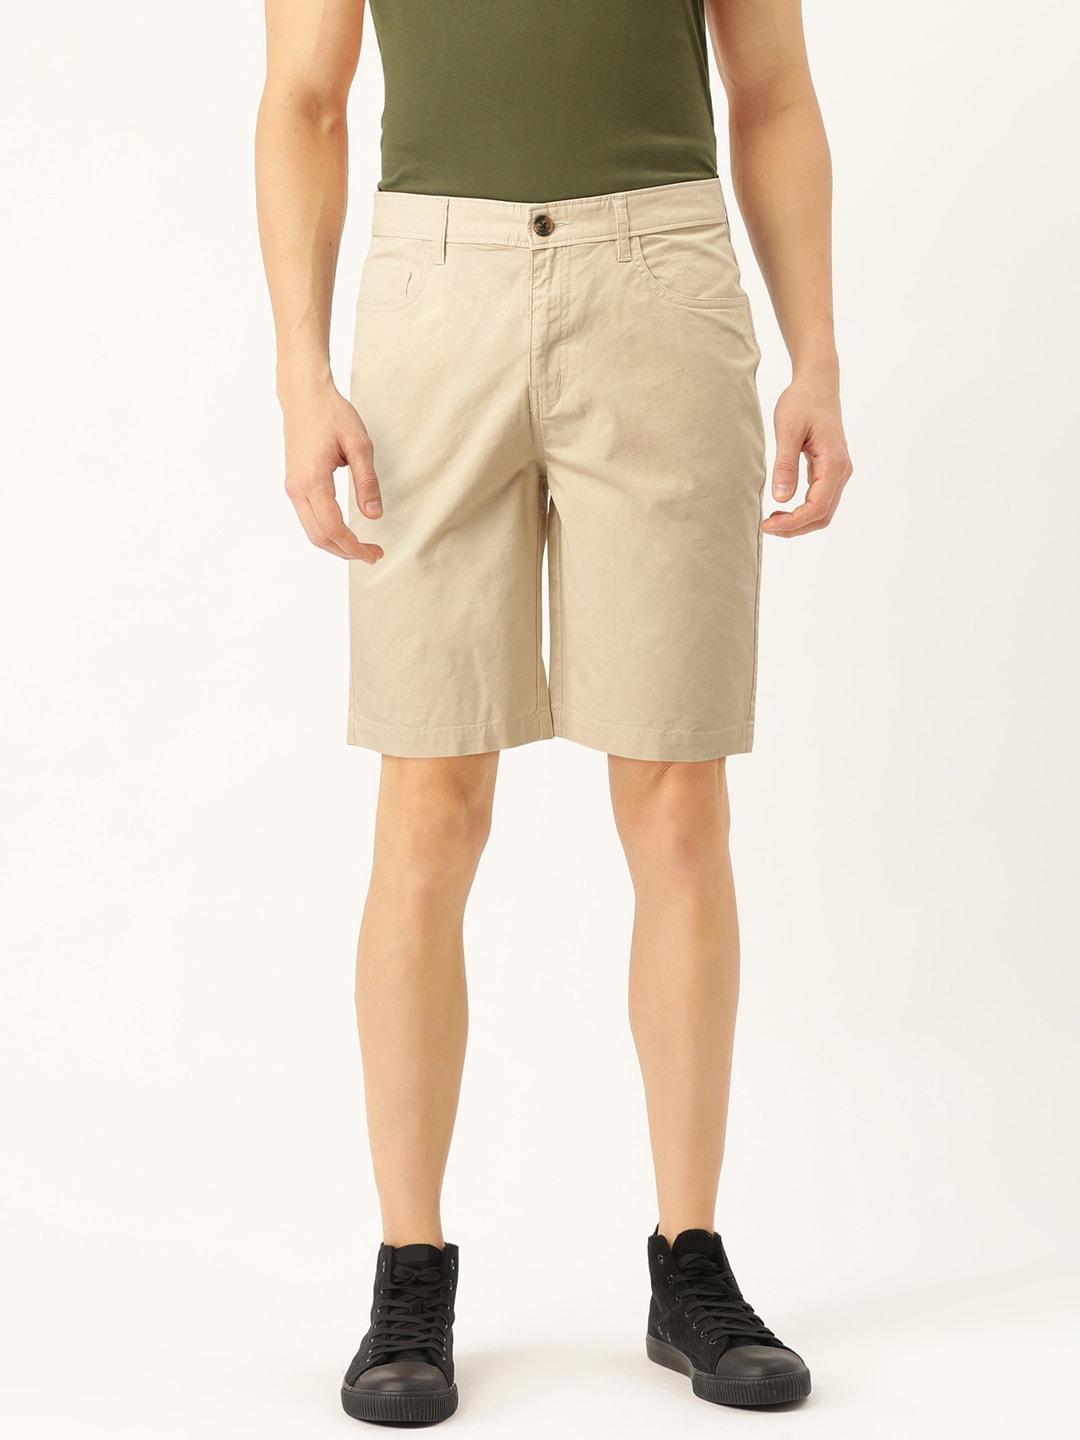 United Colors of Benetton Men Beige Twill Weave Solid Slim Fit Chino Shorts